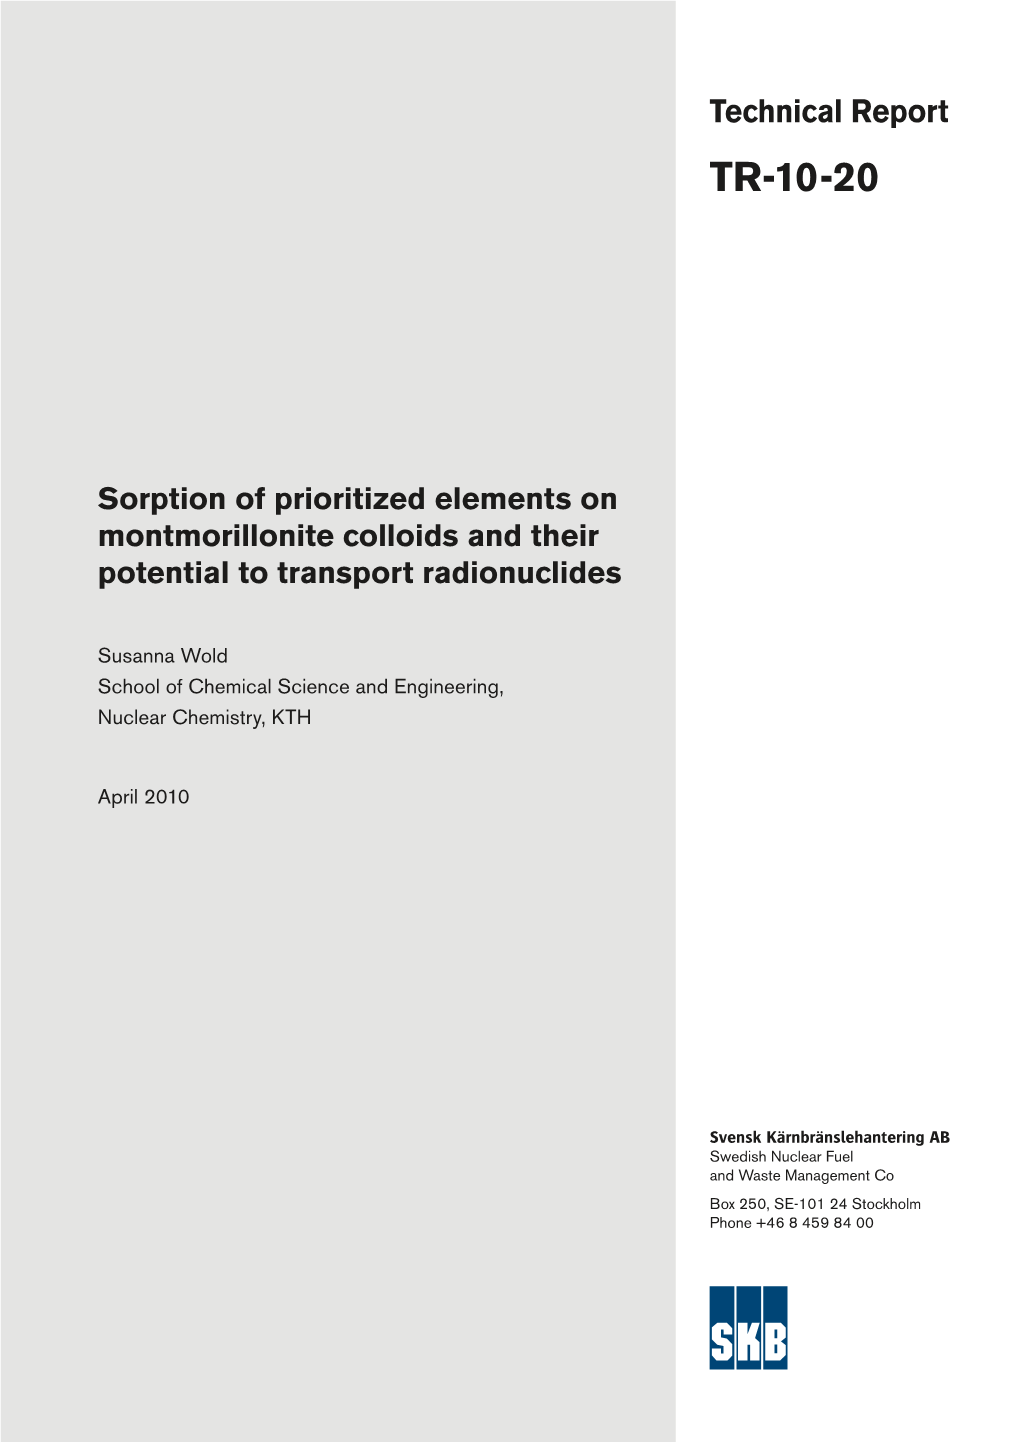 Sorption of Prioritized Elements on Montmorillonite Colloids and Their Potential to Transport Radionuclides